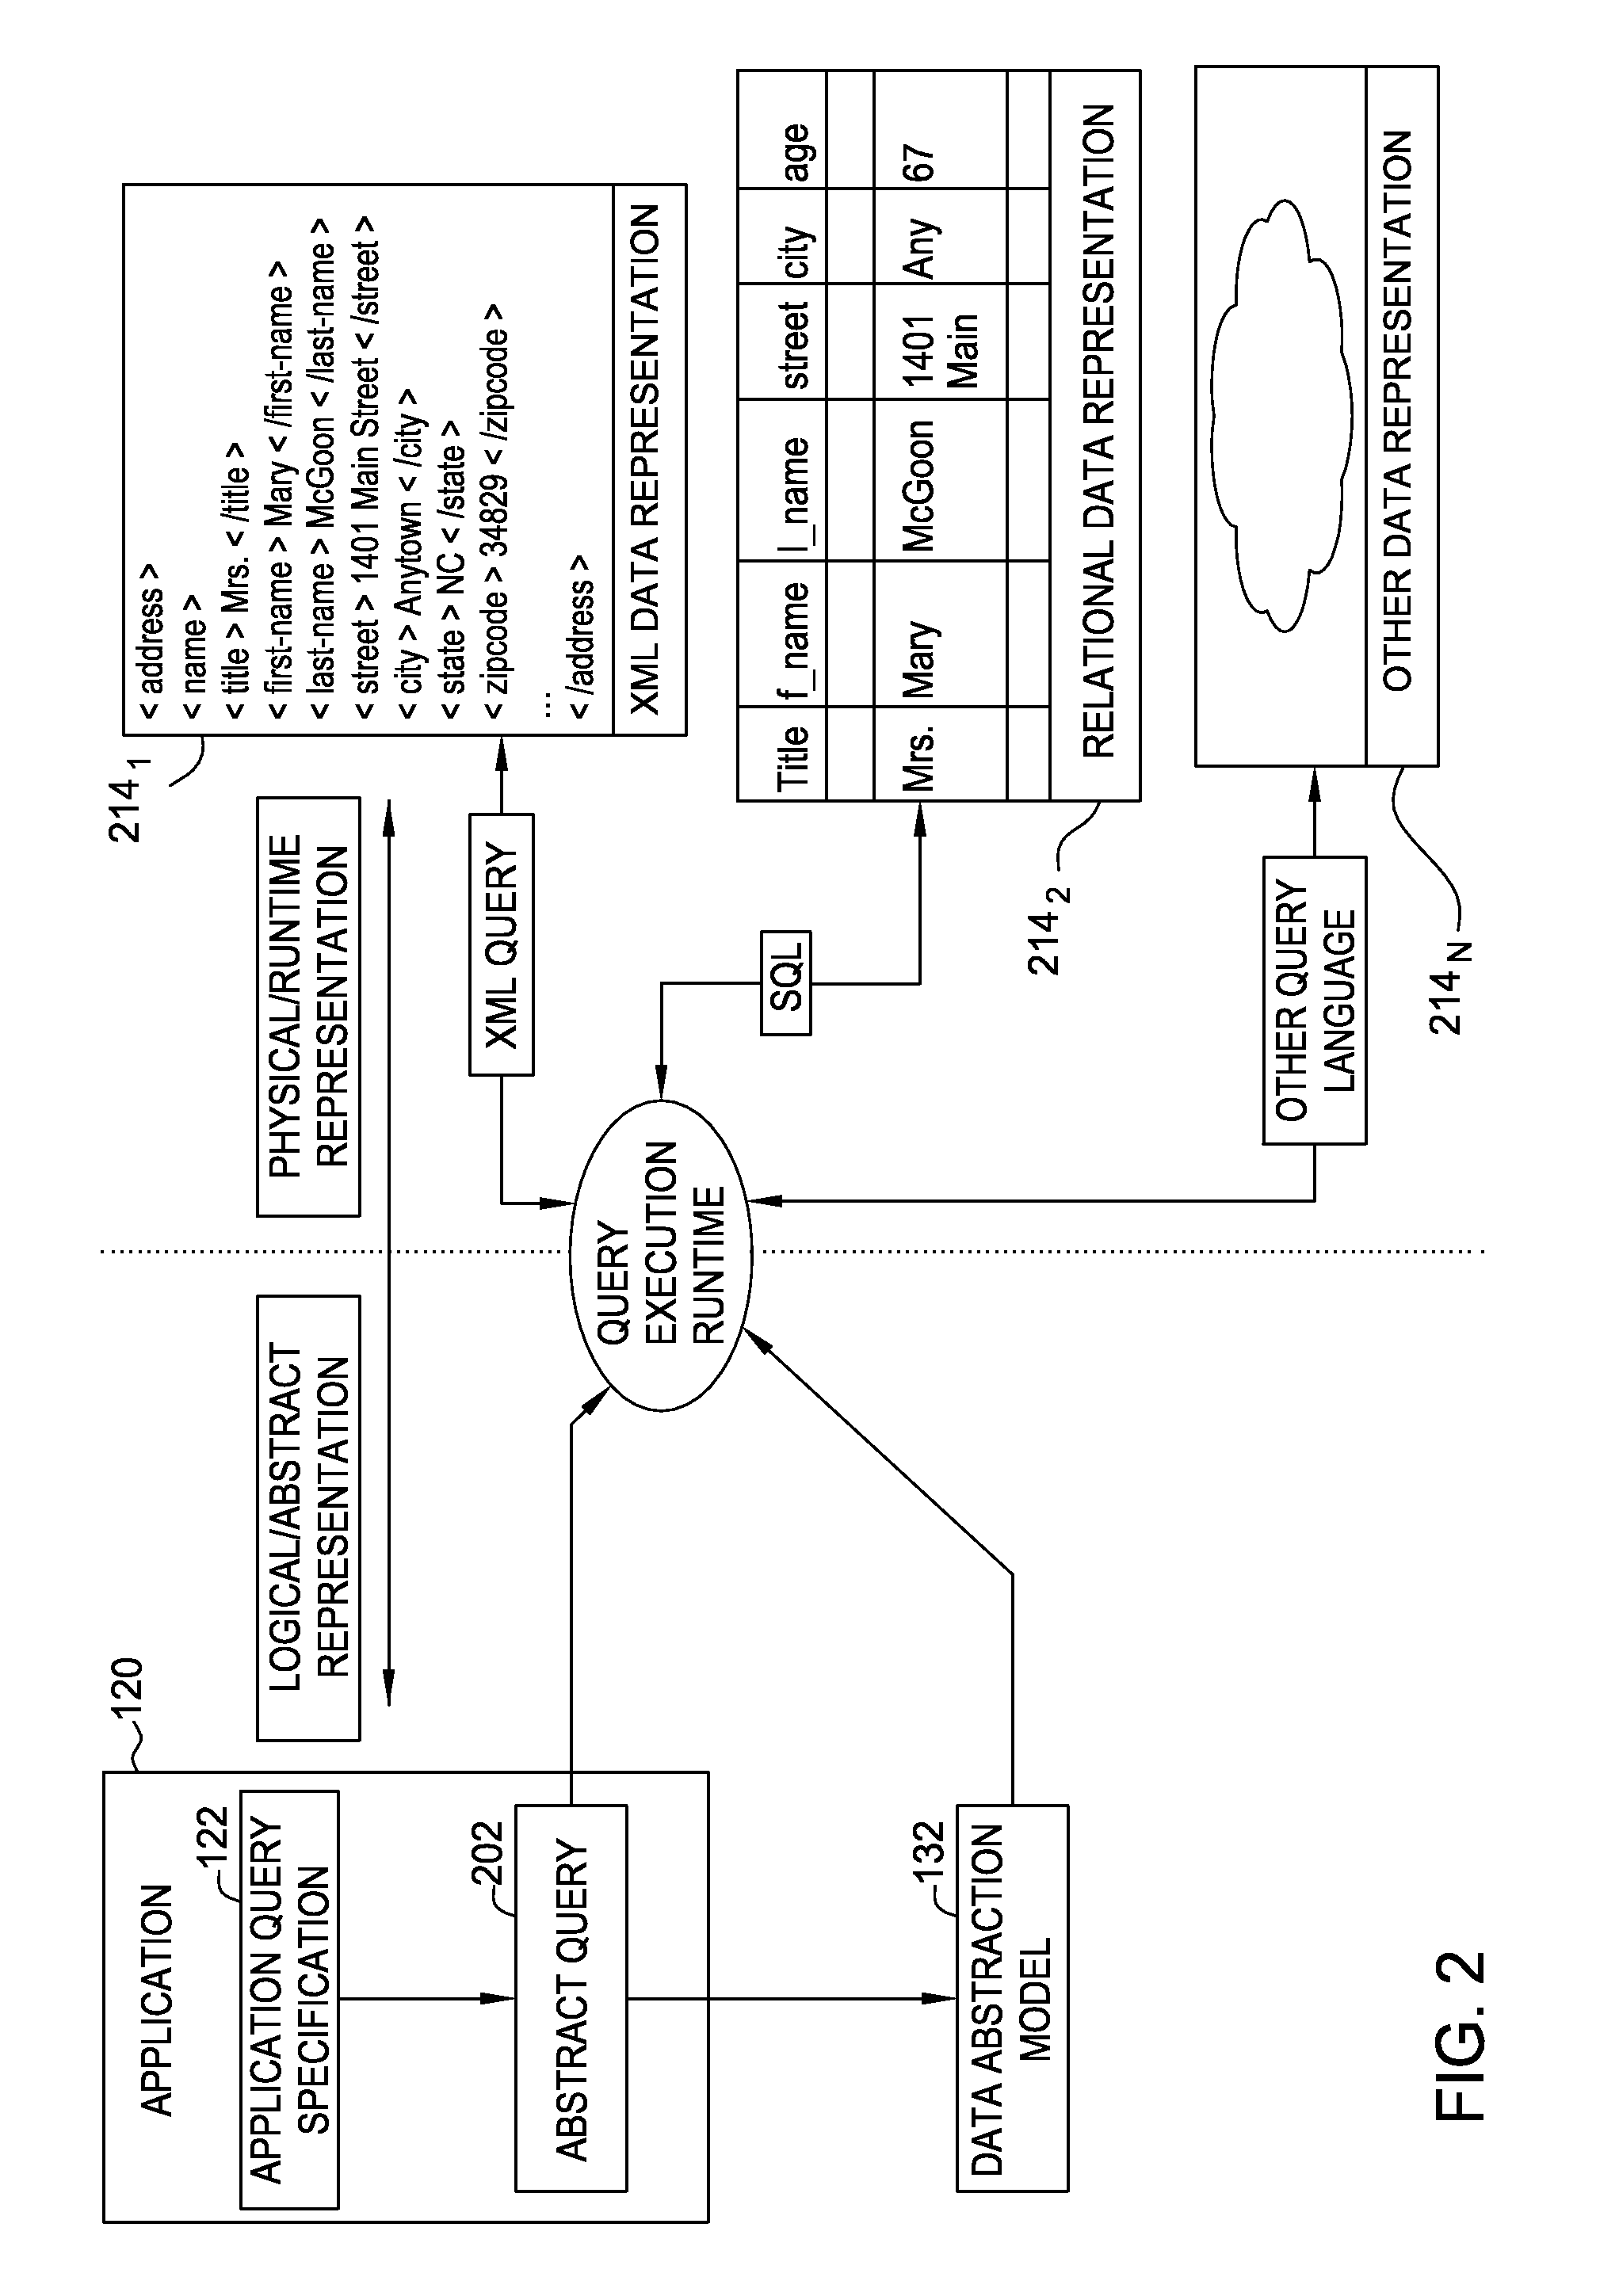 Extracting portions of an abstract database for problem determination